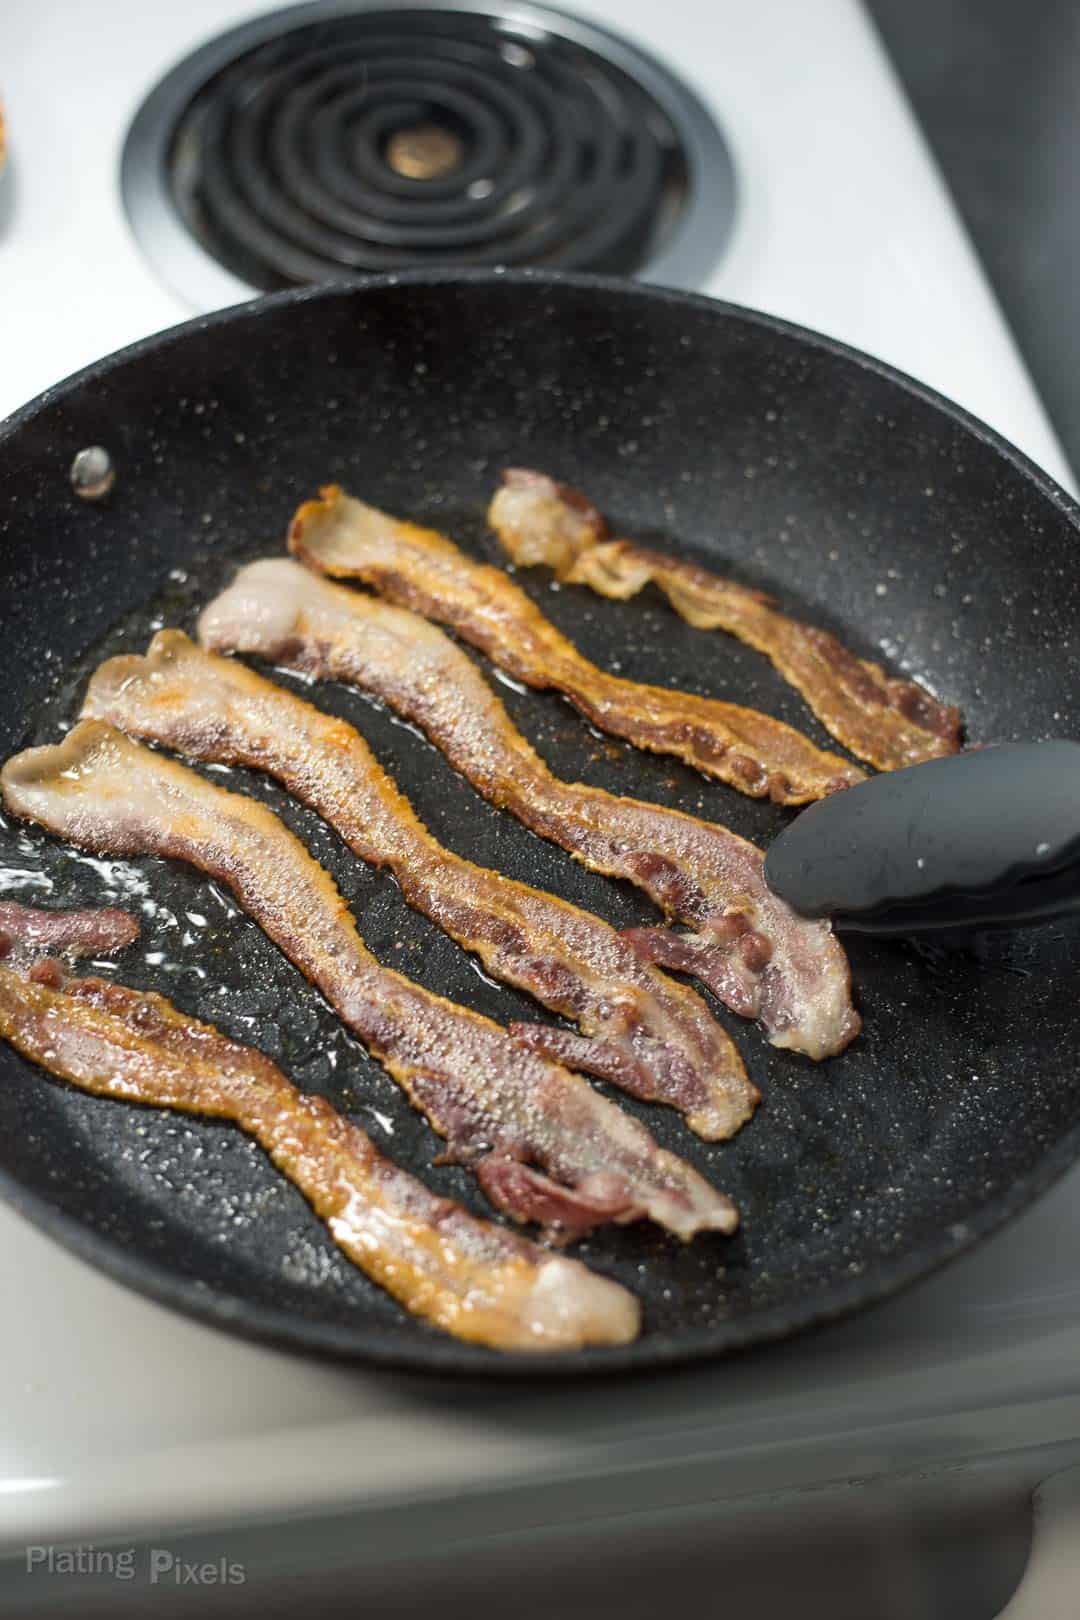 Process shot of cooking bacon in a pan over the stove